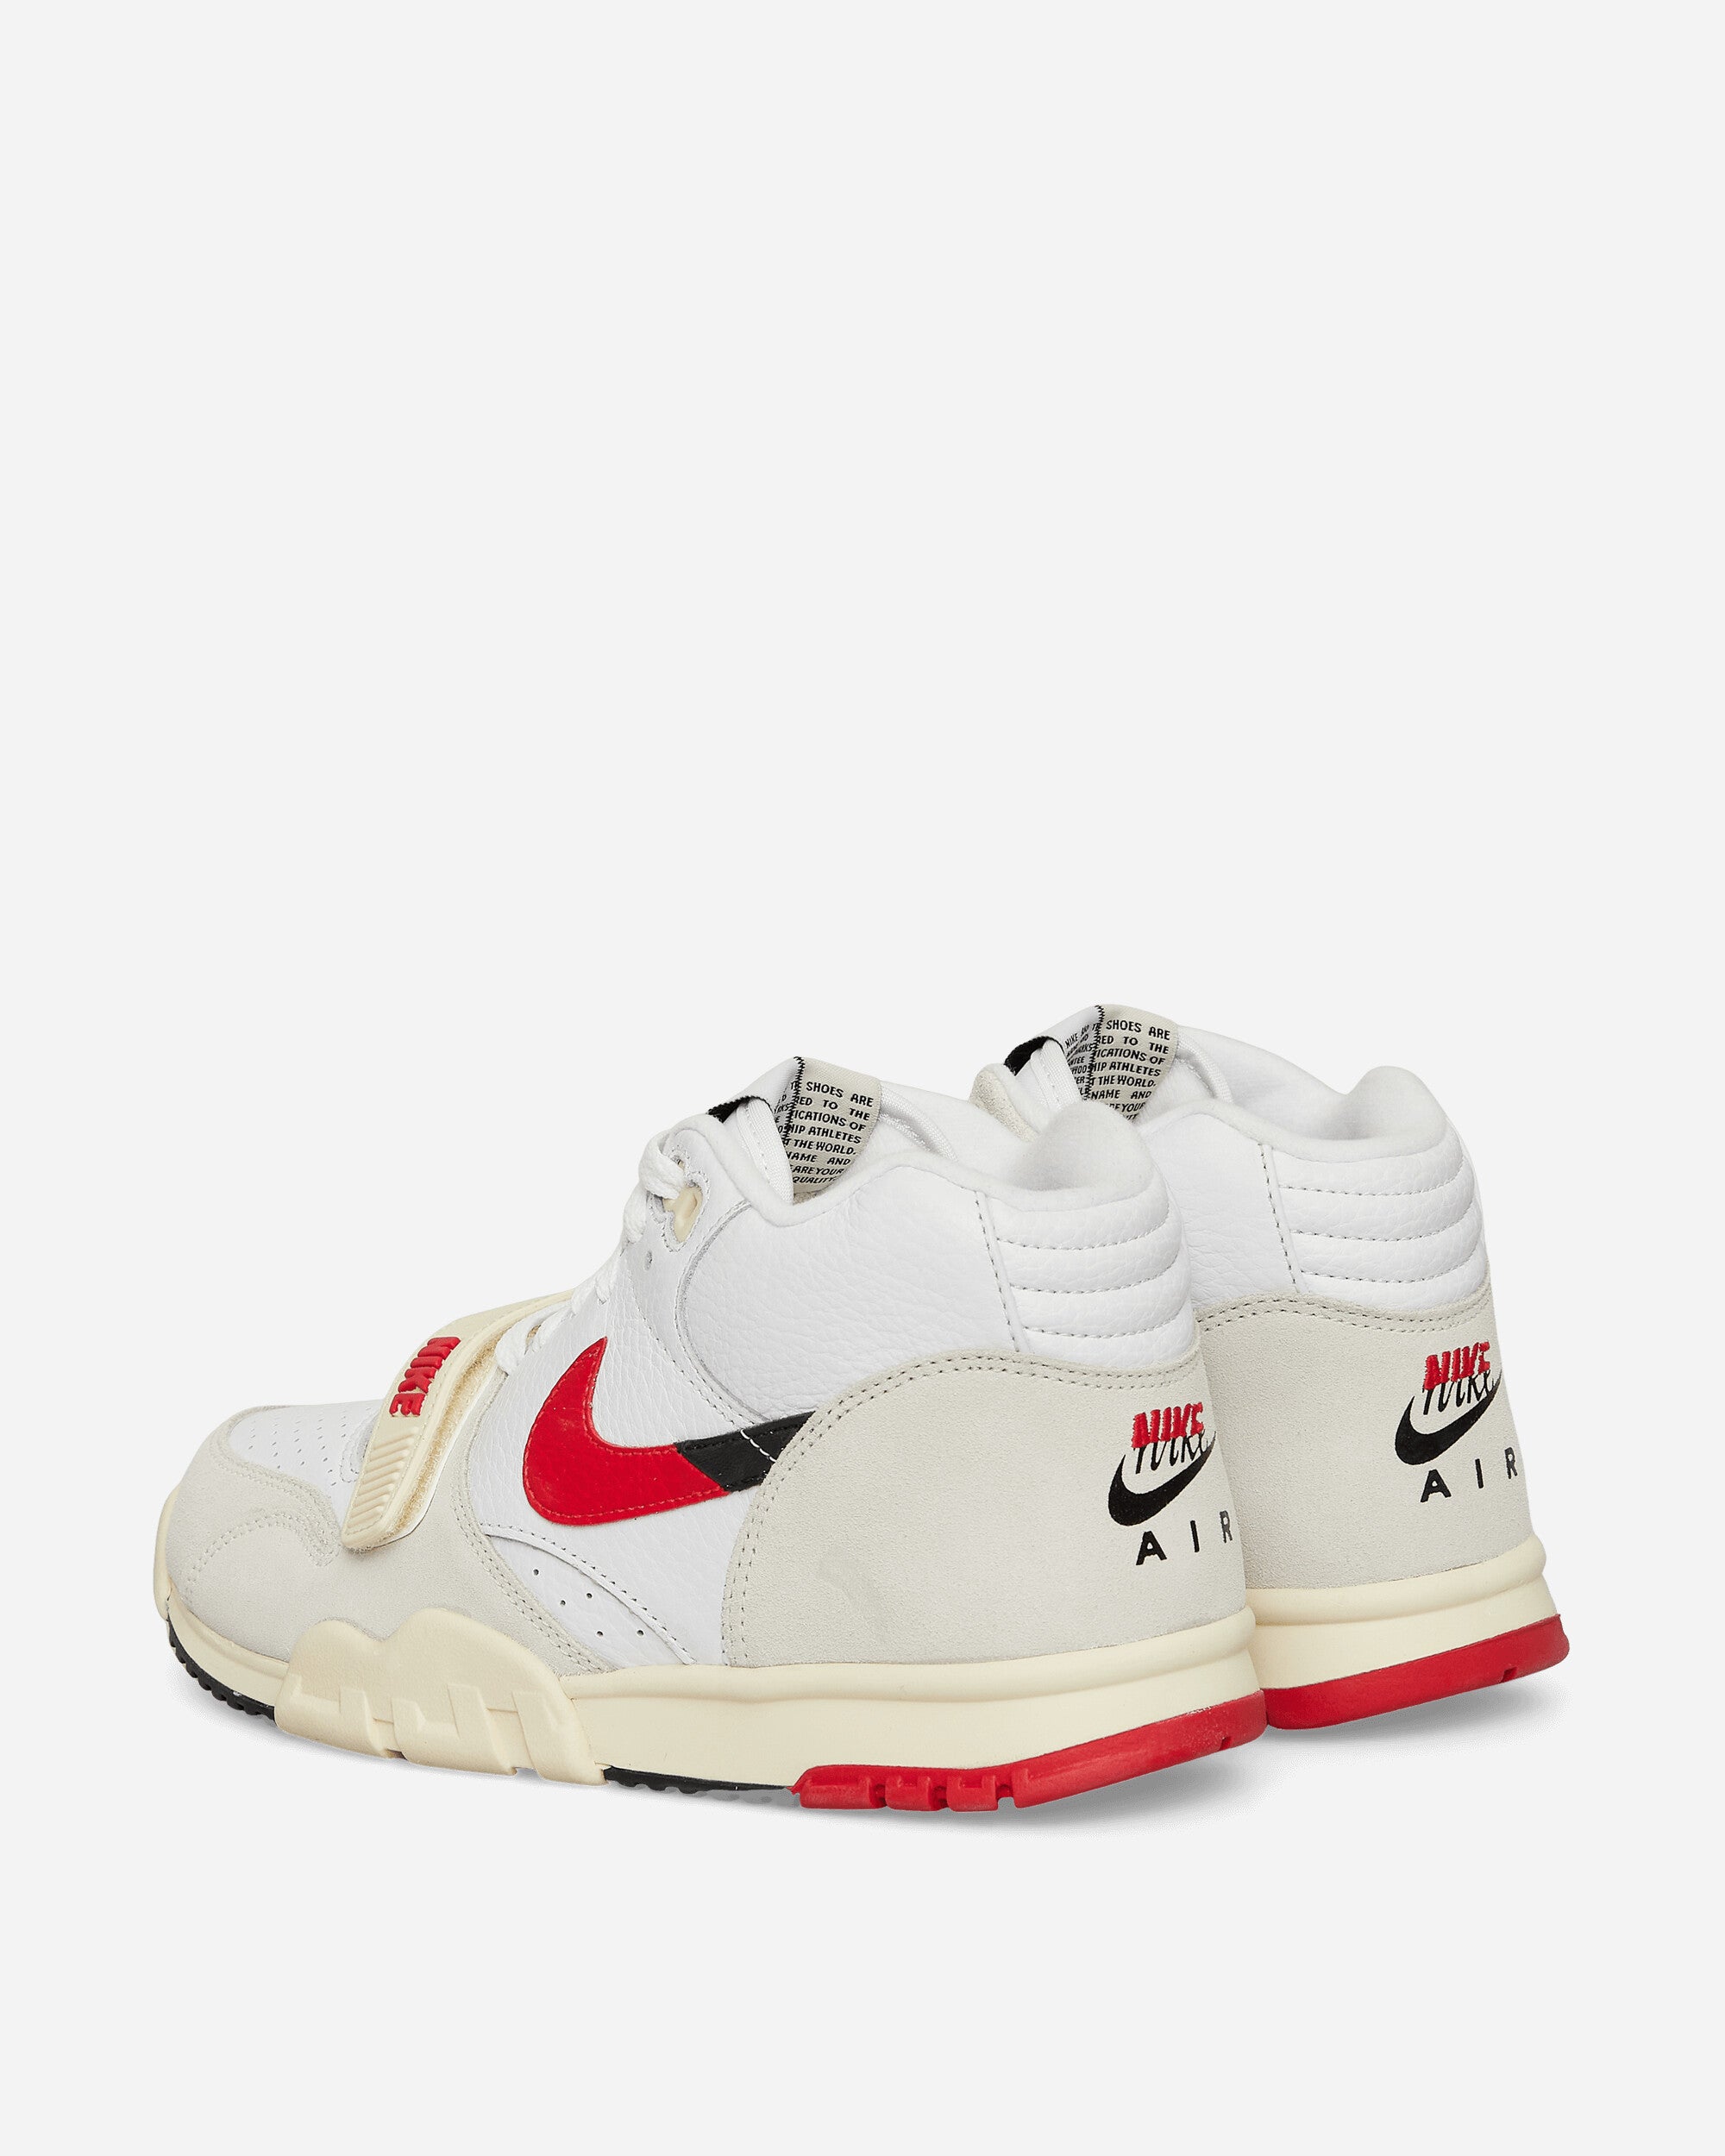 Nike Air Trainer 1 White/University Red Sneakers Mid DZ2547-100